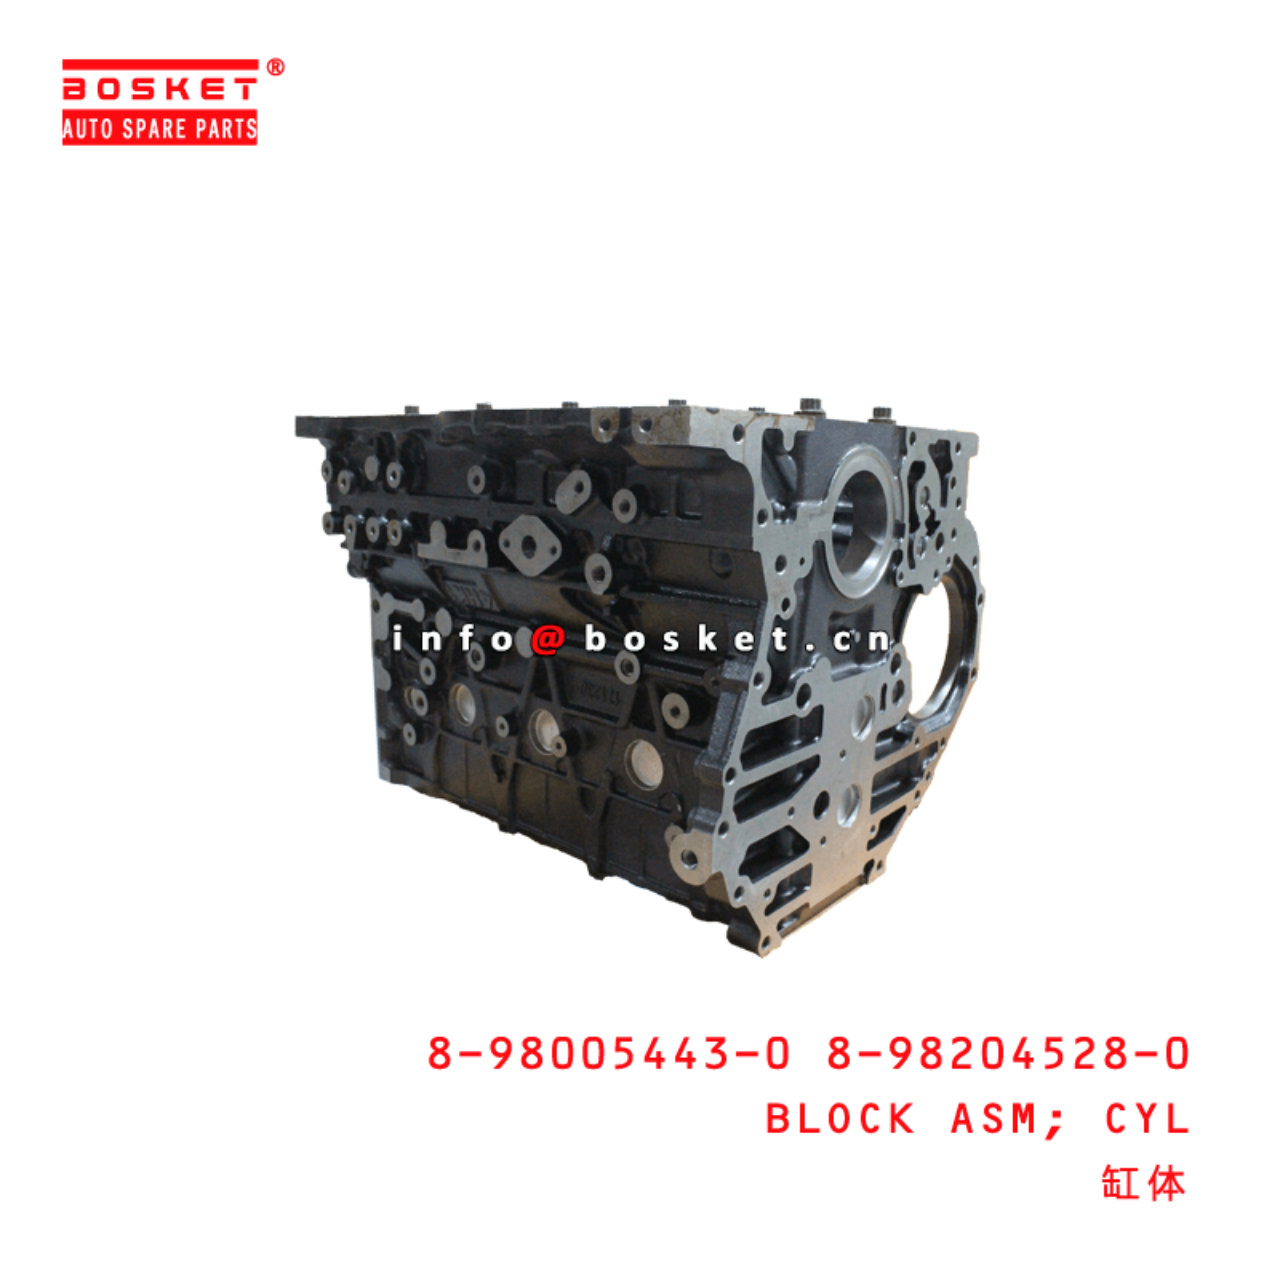 8-98005443-0 8-98204528-0 Cylinder Block Assembly 8980054430 8982045280 Suitable for ISUZU 700P 4HK1